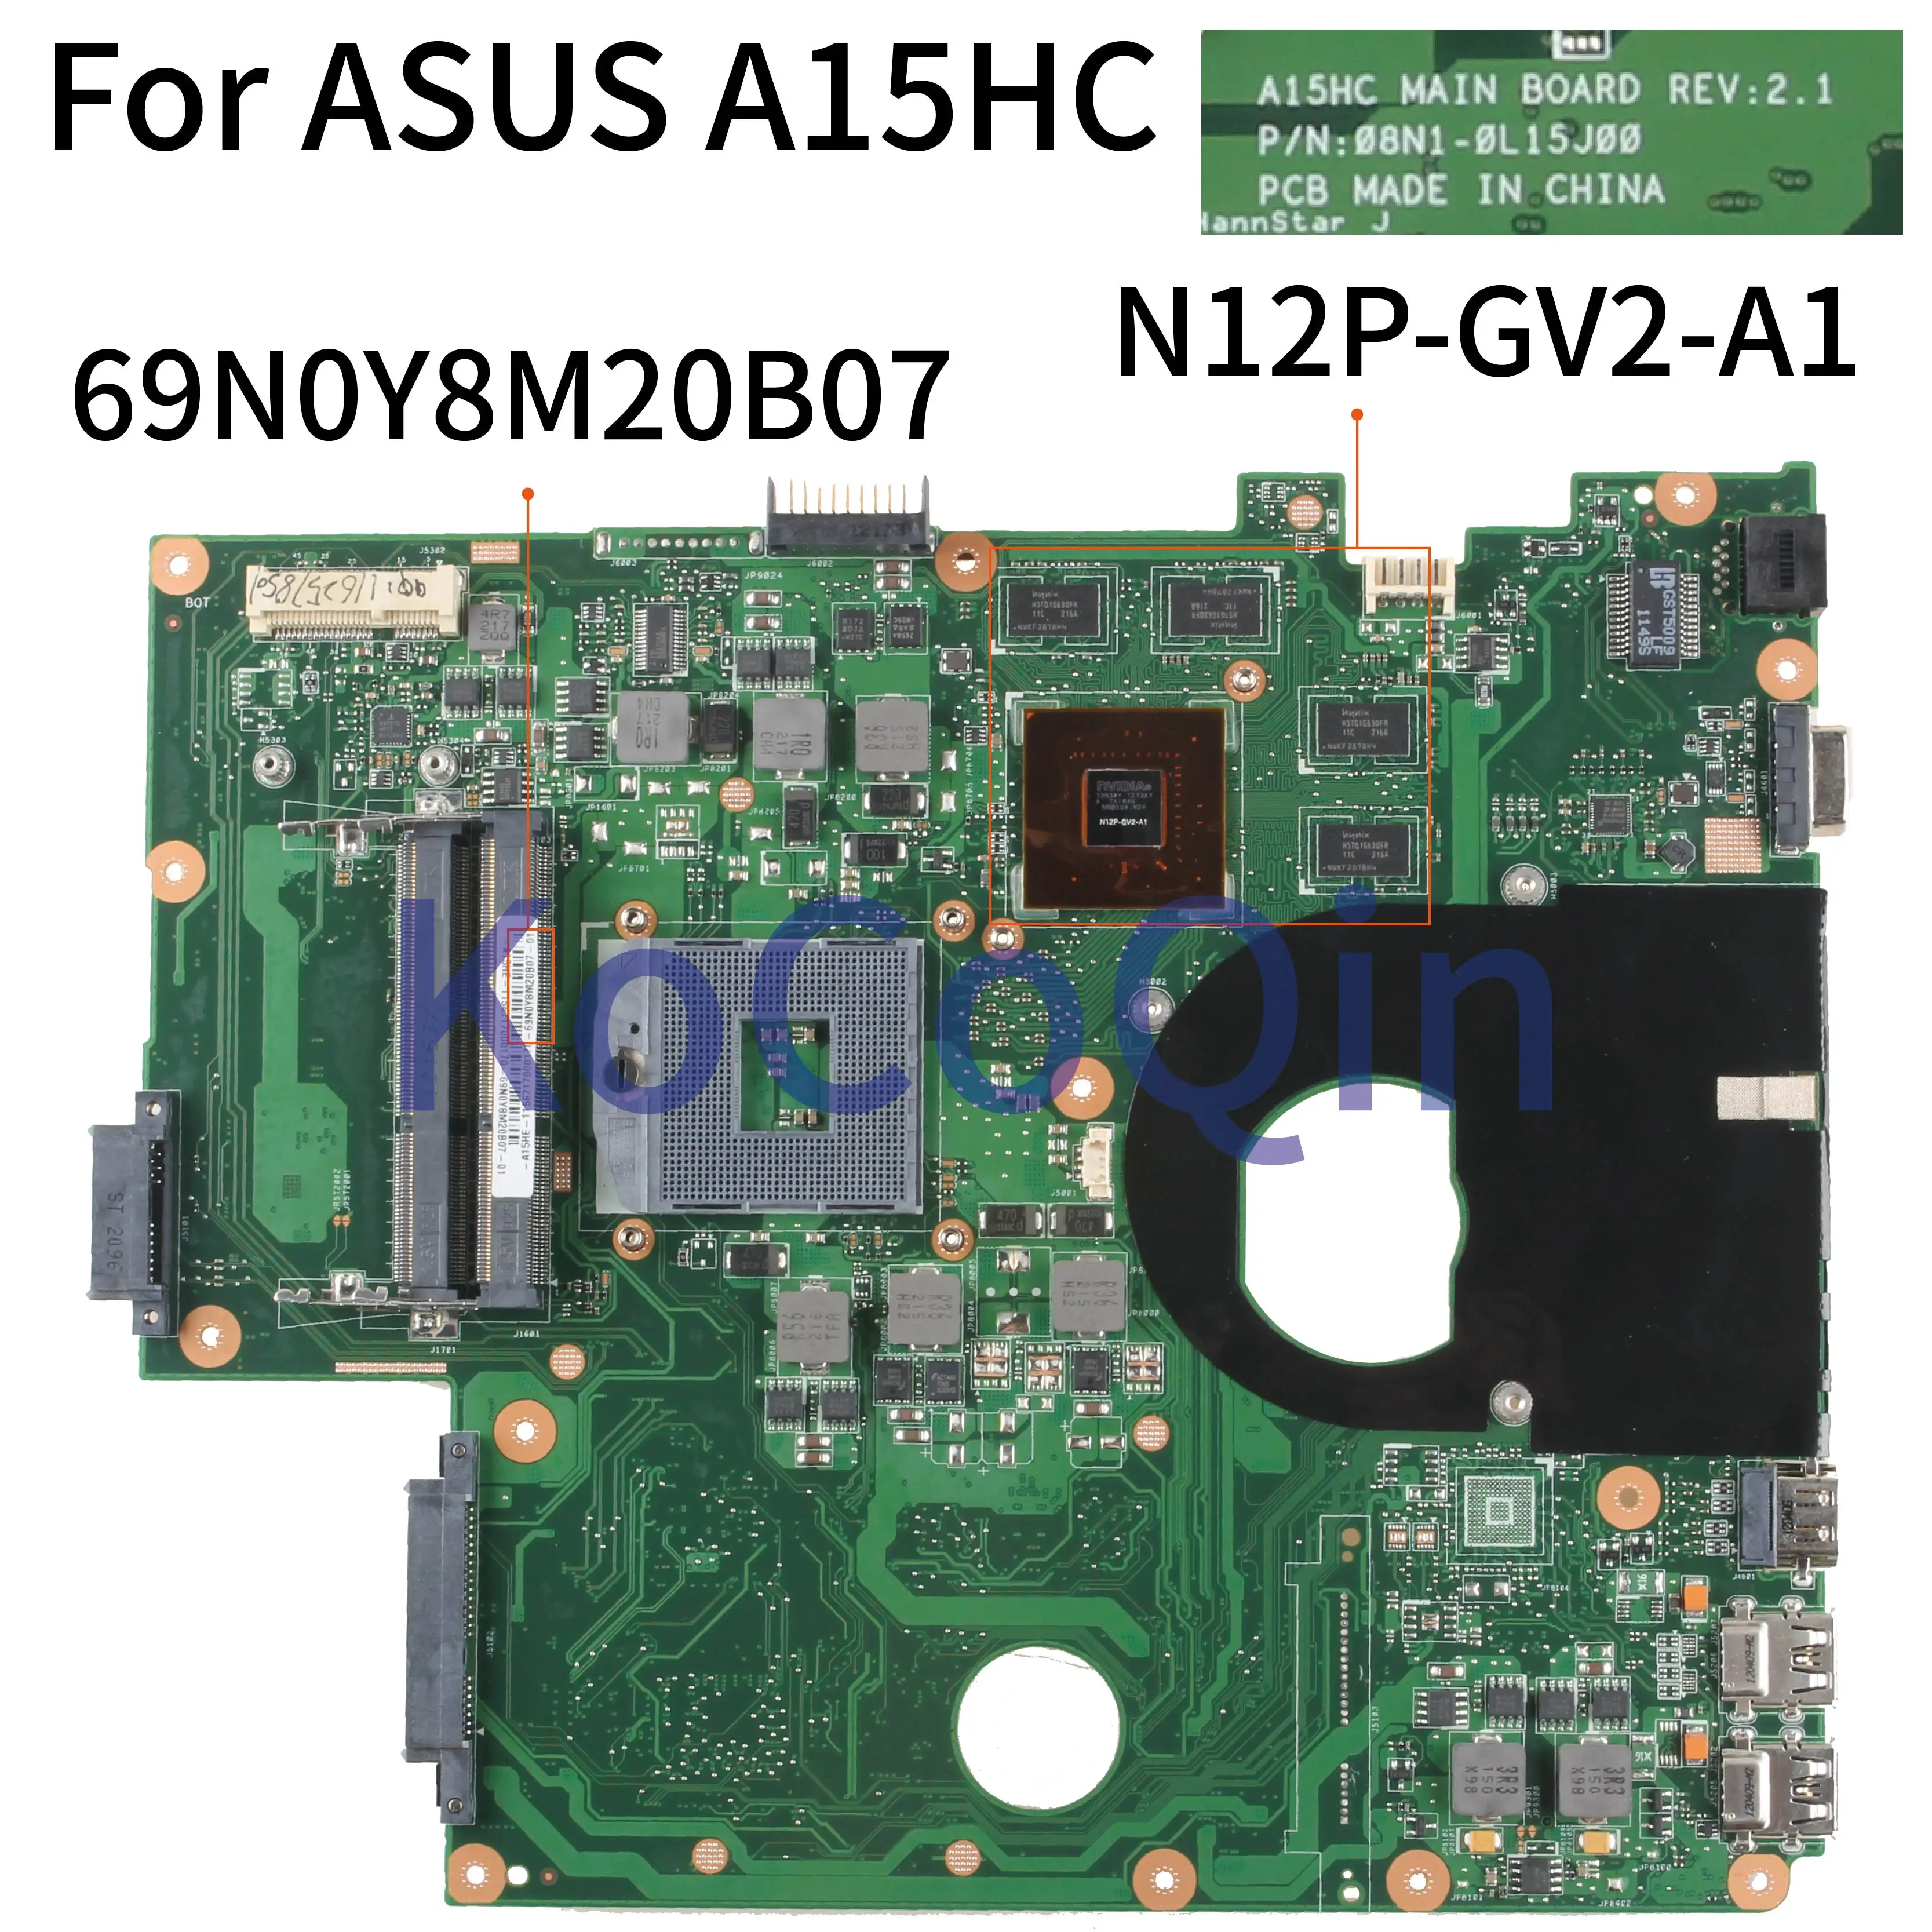 

For ASUS A15HC Core HM65 N12P-GV2-A1 Notebook Mainboard REV:2.1 Laptop Motherboard